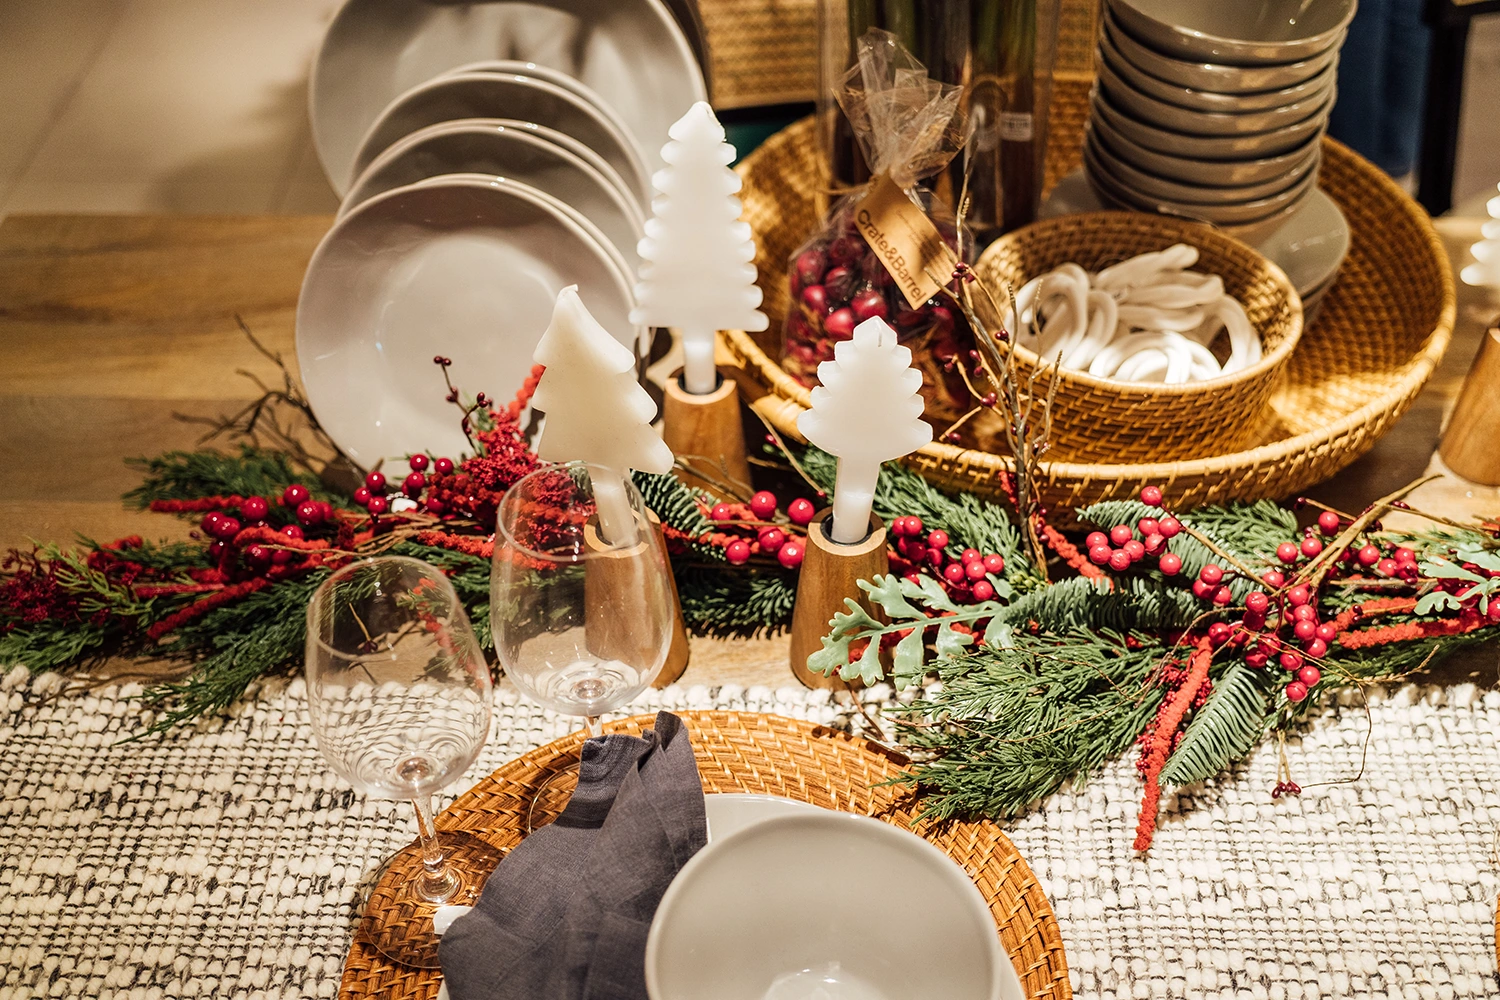 A festive table setting with cranberries for the holiday season.